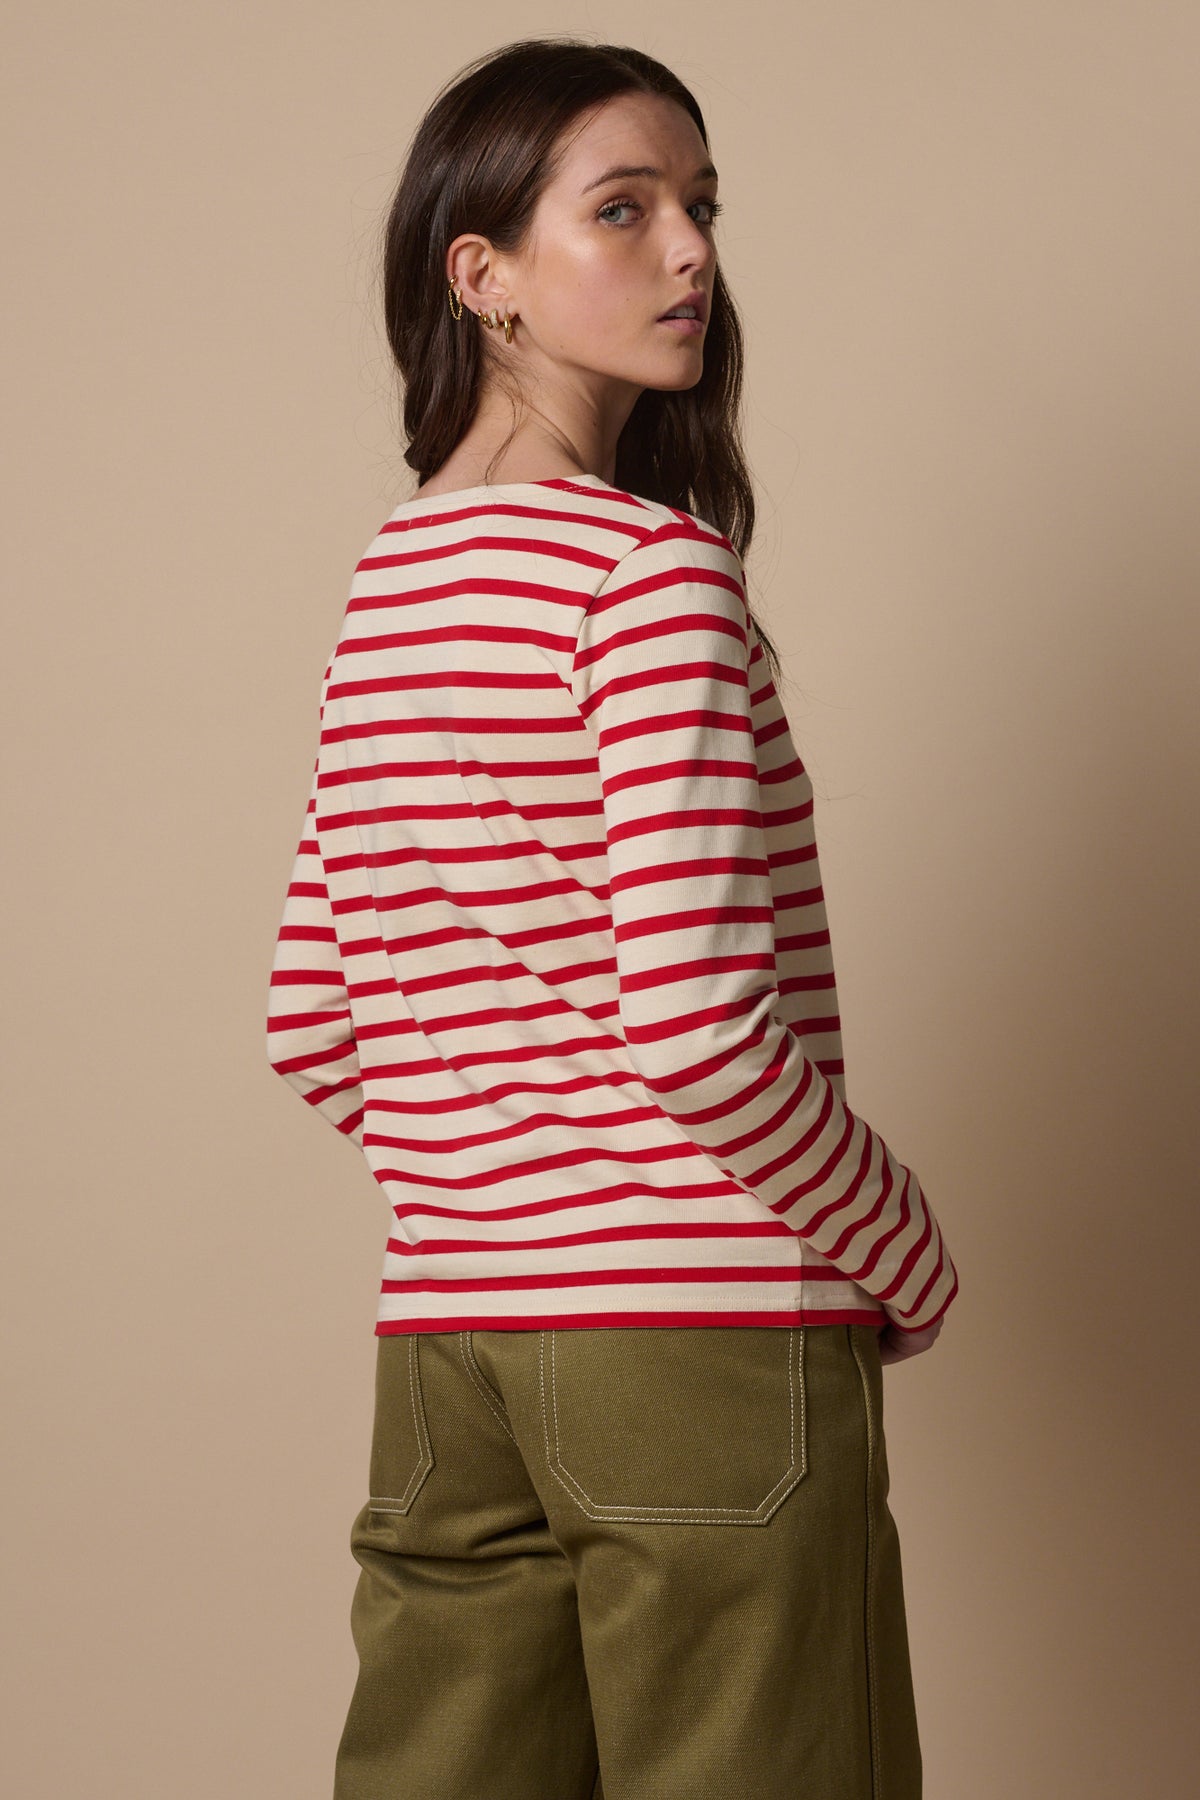 
            The back of white female with long brunette hair wearing Breton in ecru and red